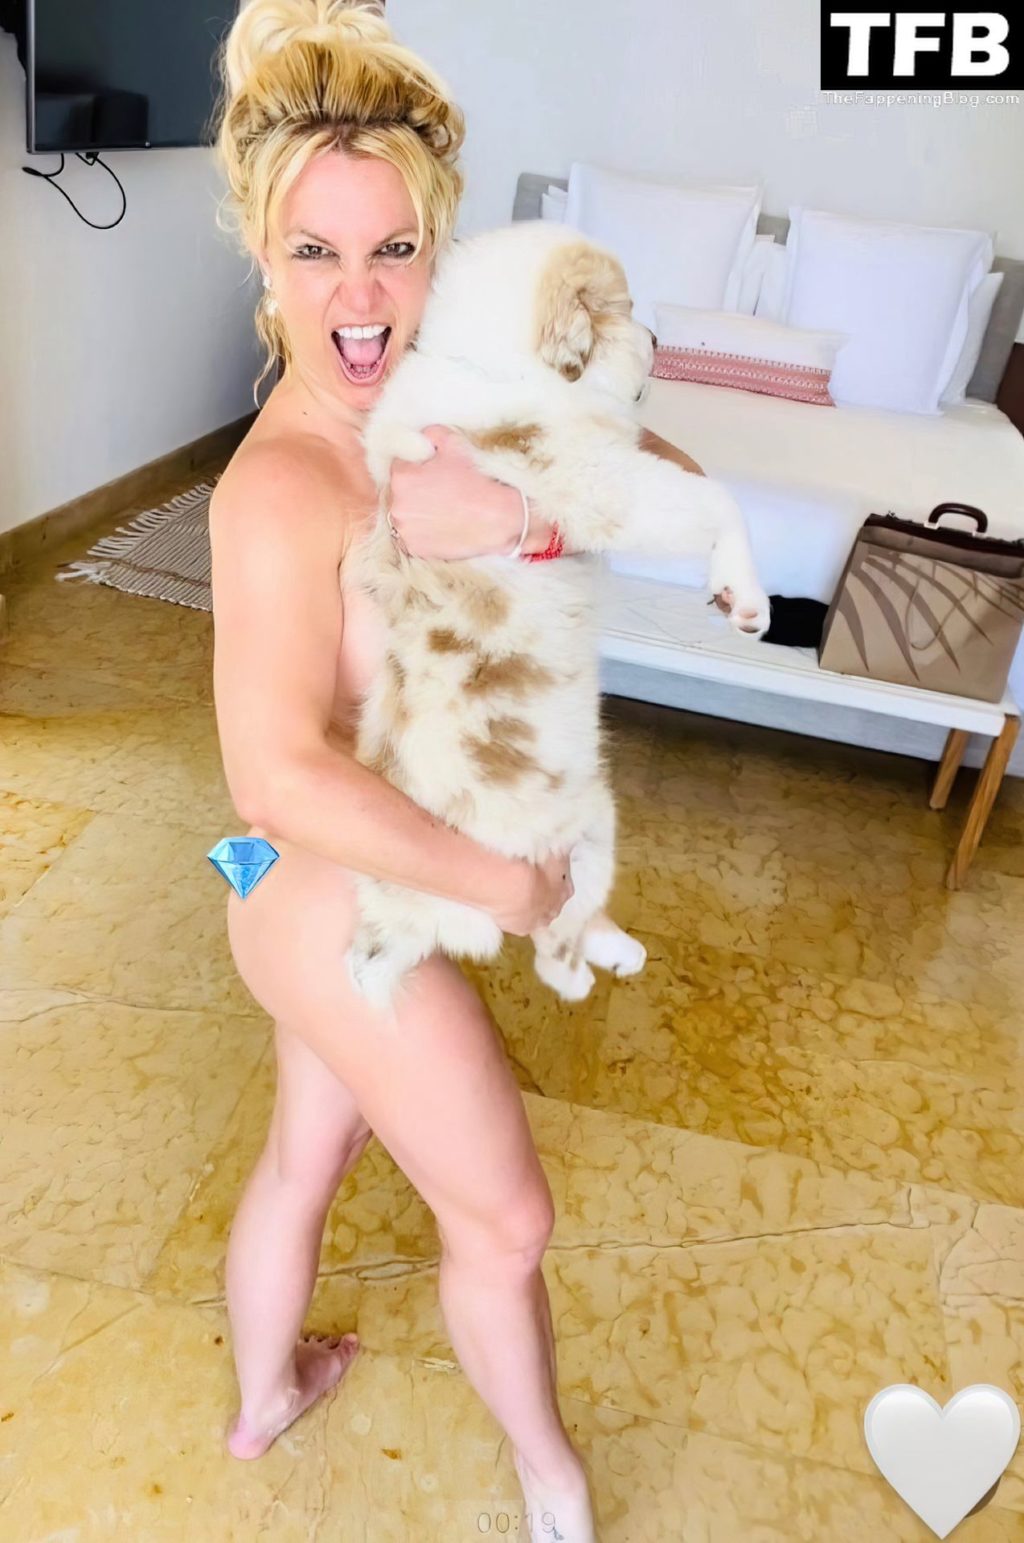 Britney Spears Nude 4 1 thefappeningblog.com  1024x1543 - Britney Spears Poses Naked With Her Pooch (6 Photos)